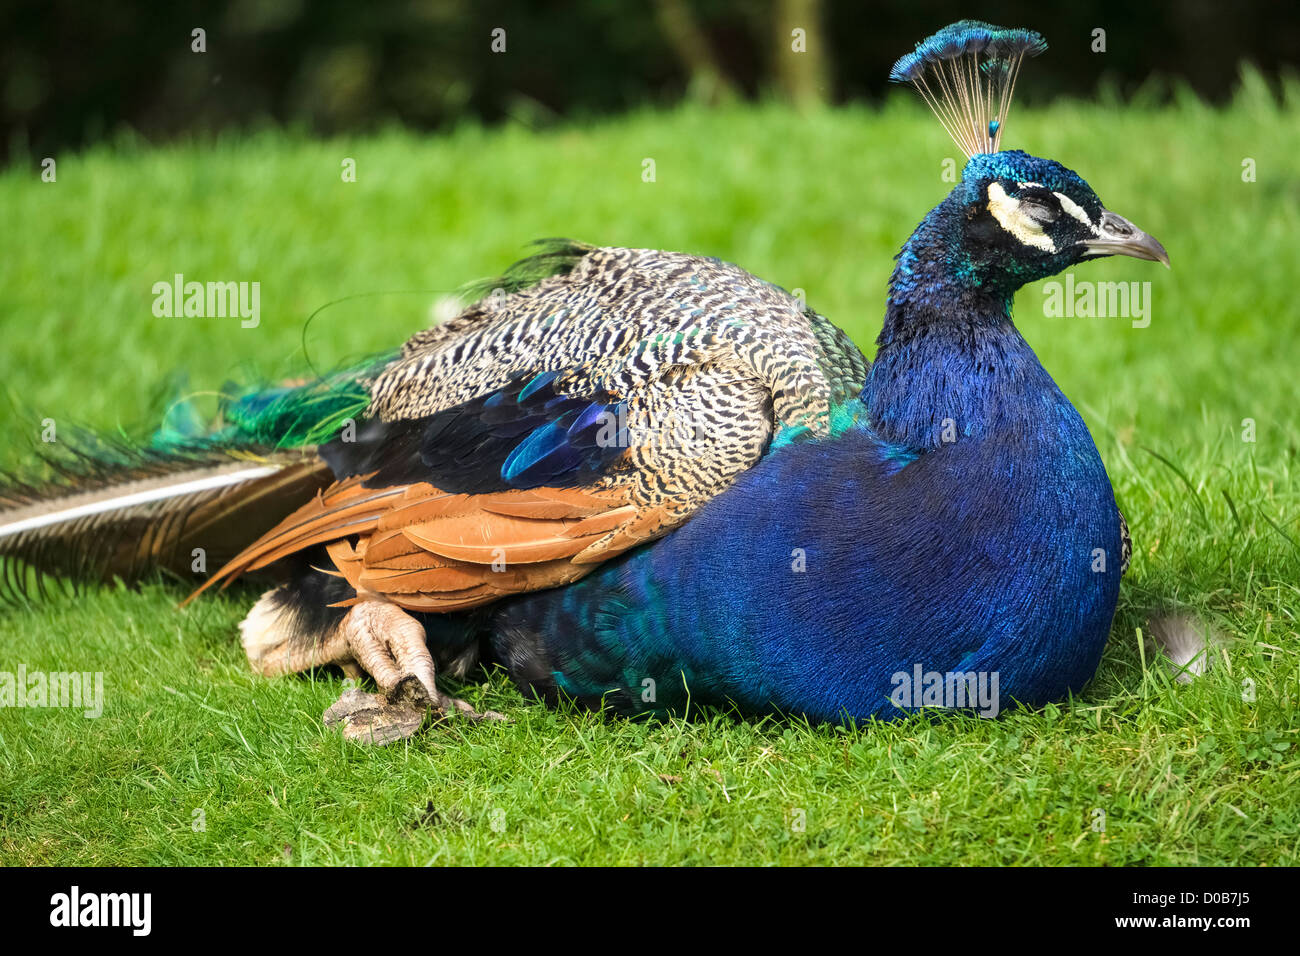 A peacock sunbathing on the grass in the Lake District Wild Animal Park. Stock Photo